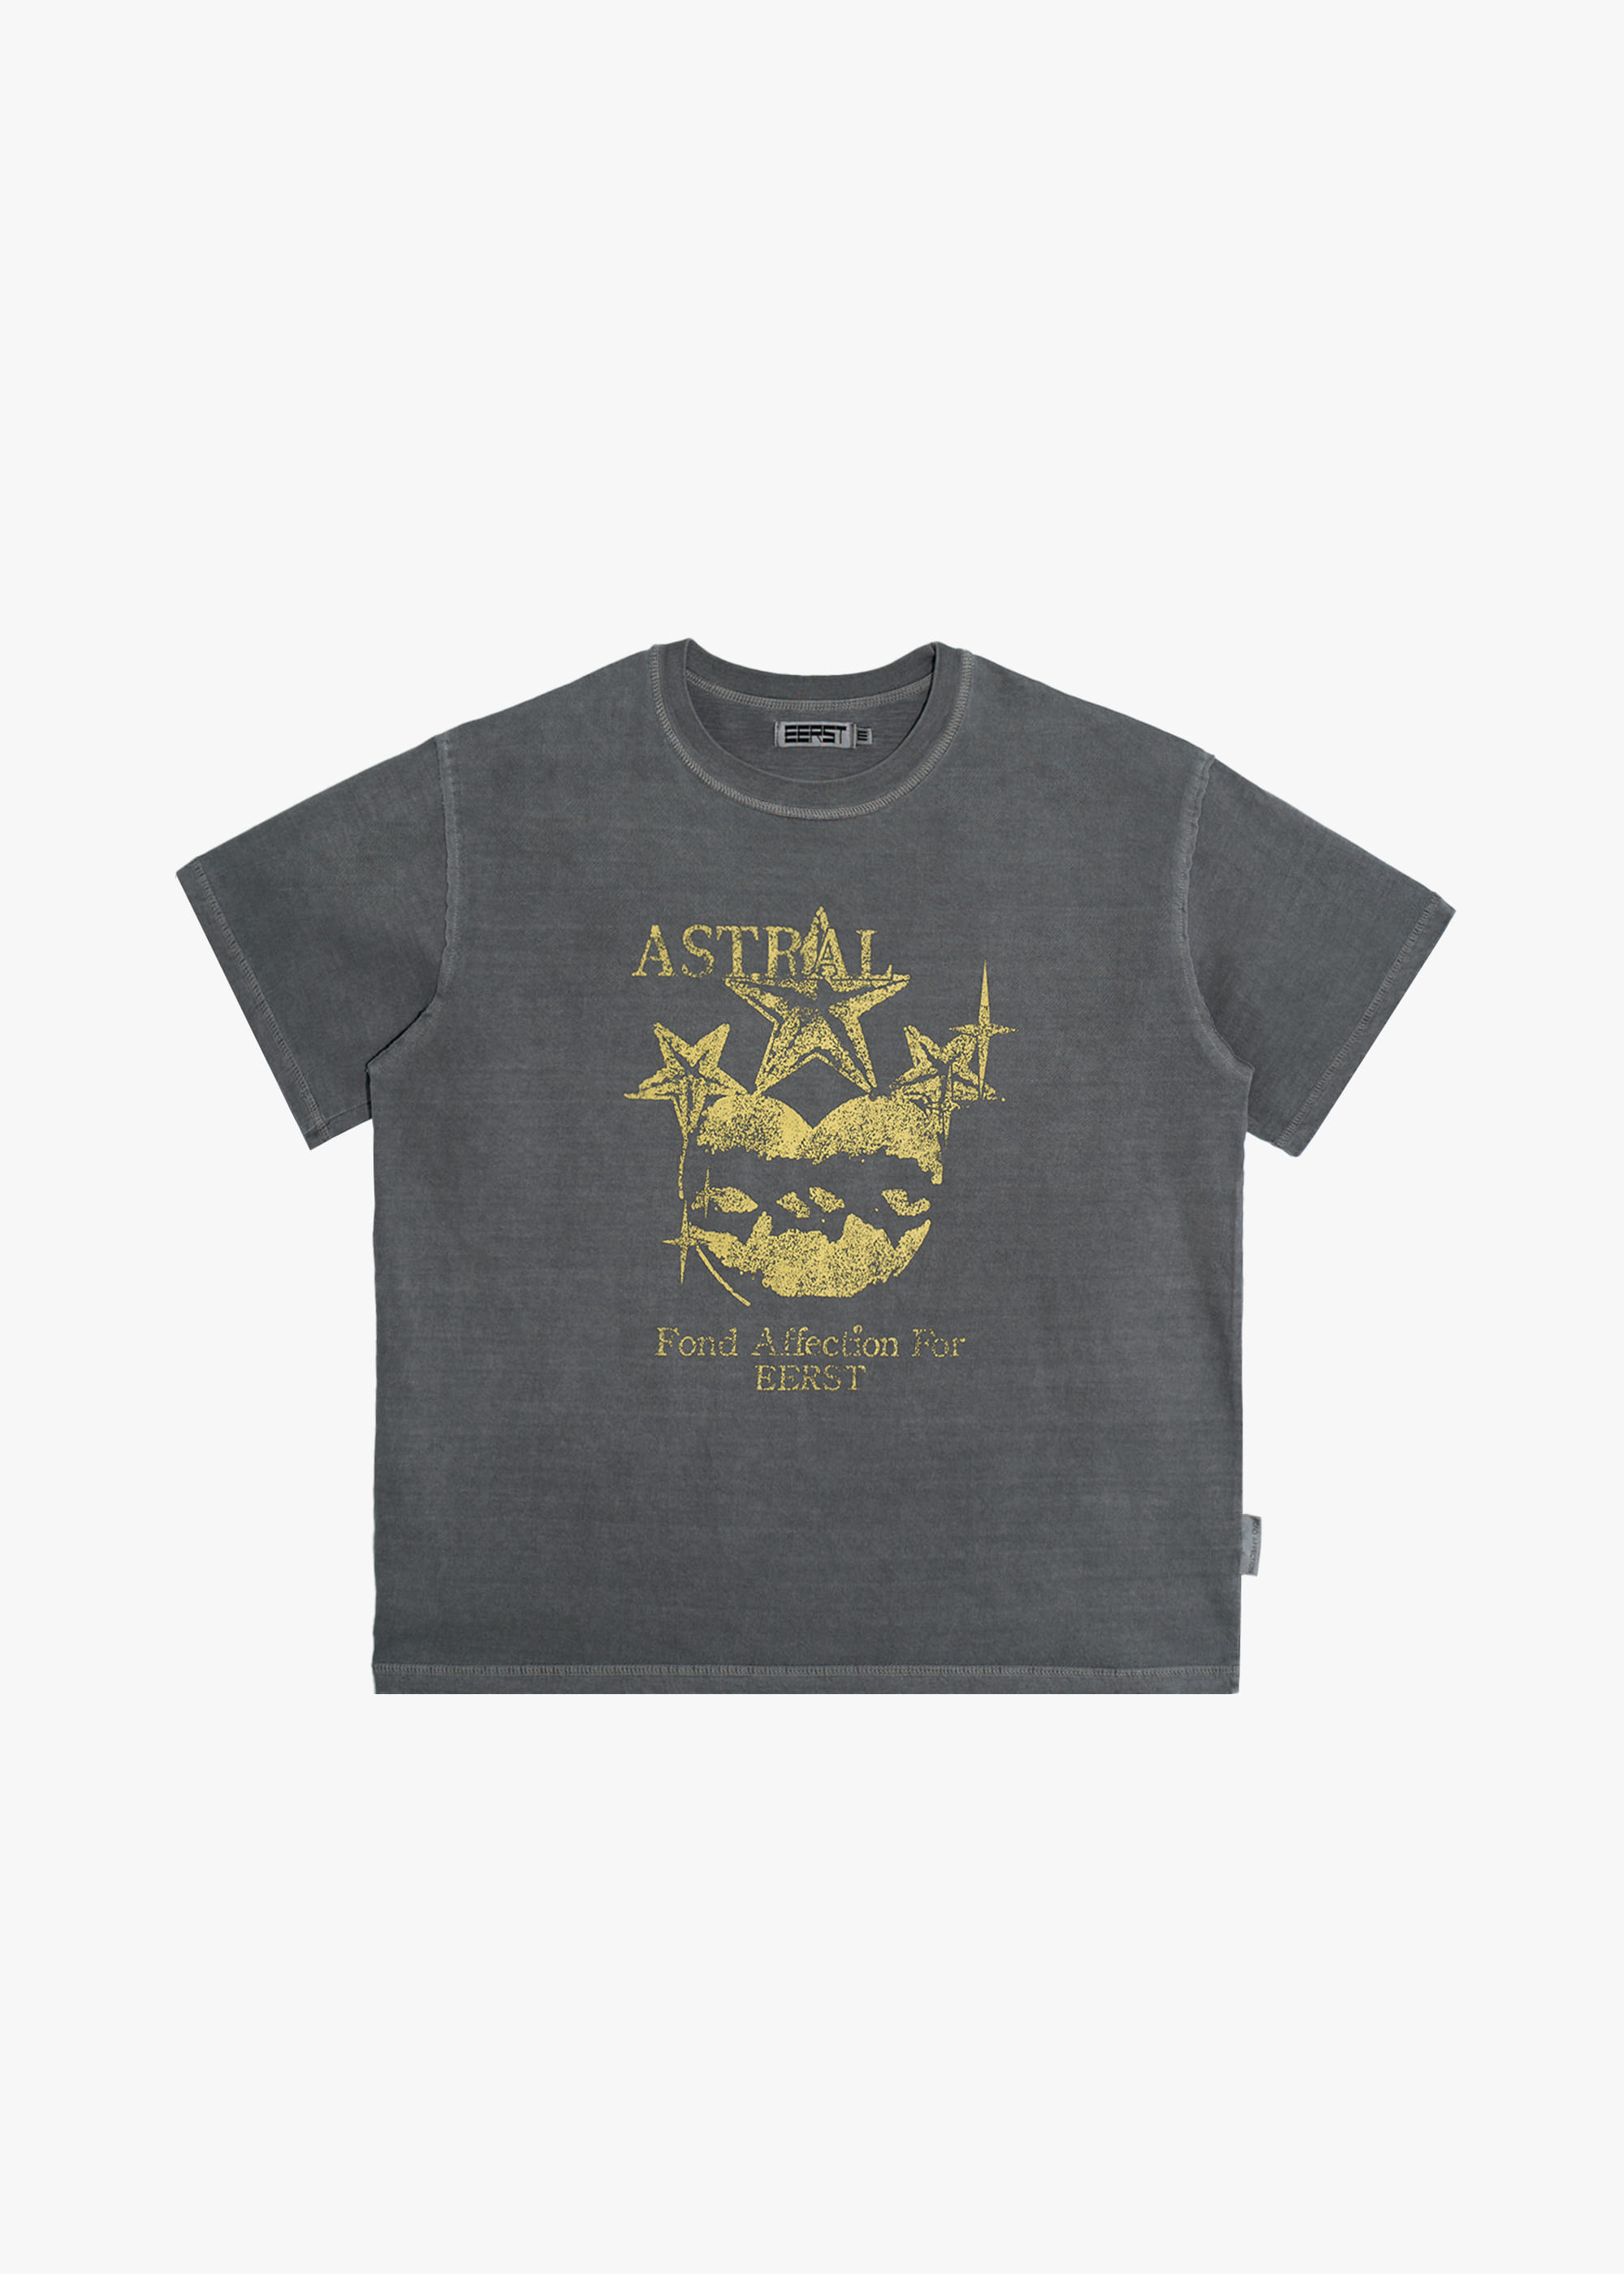 Astral T-shirt [Washed Charcoal]